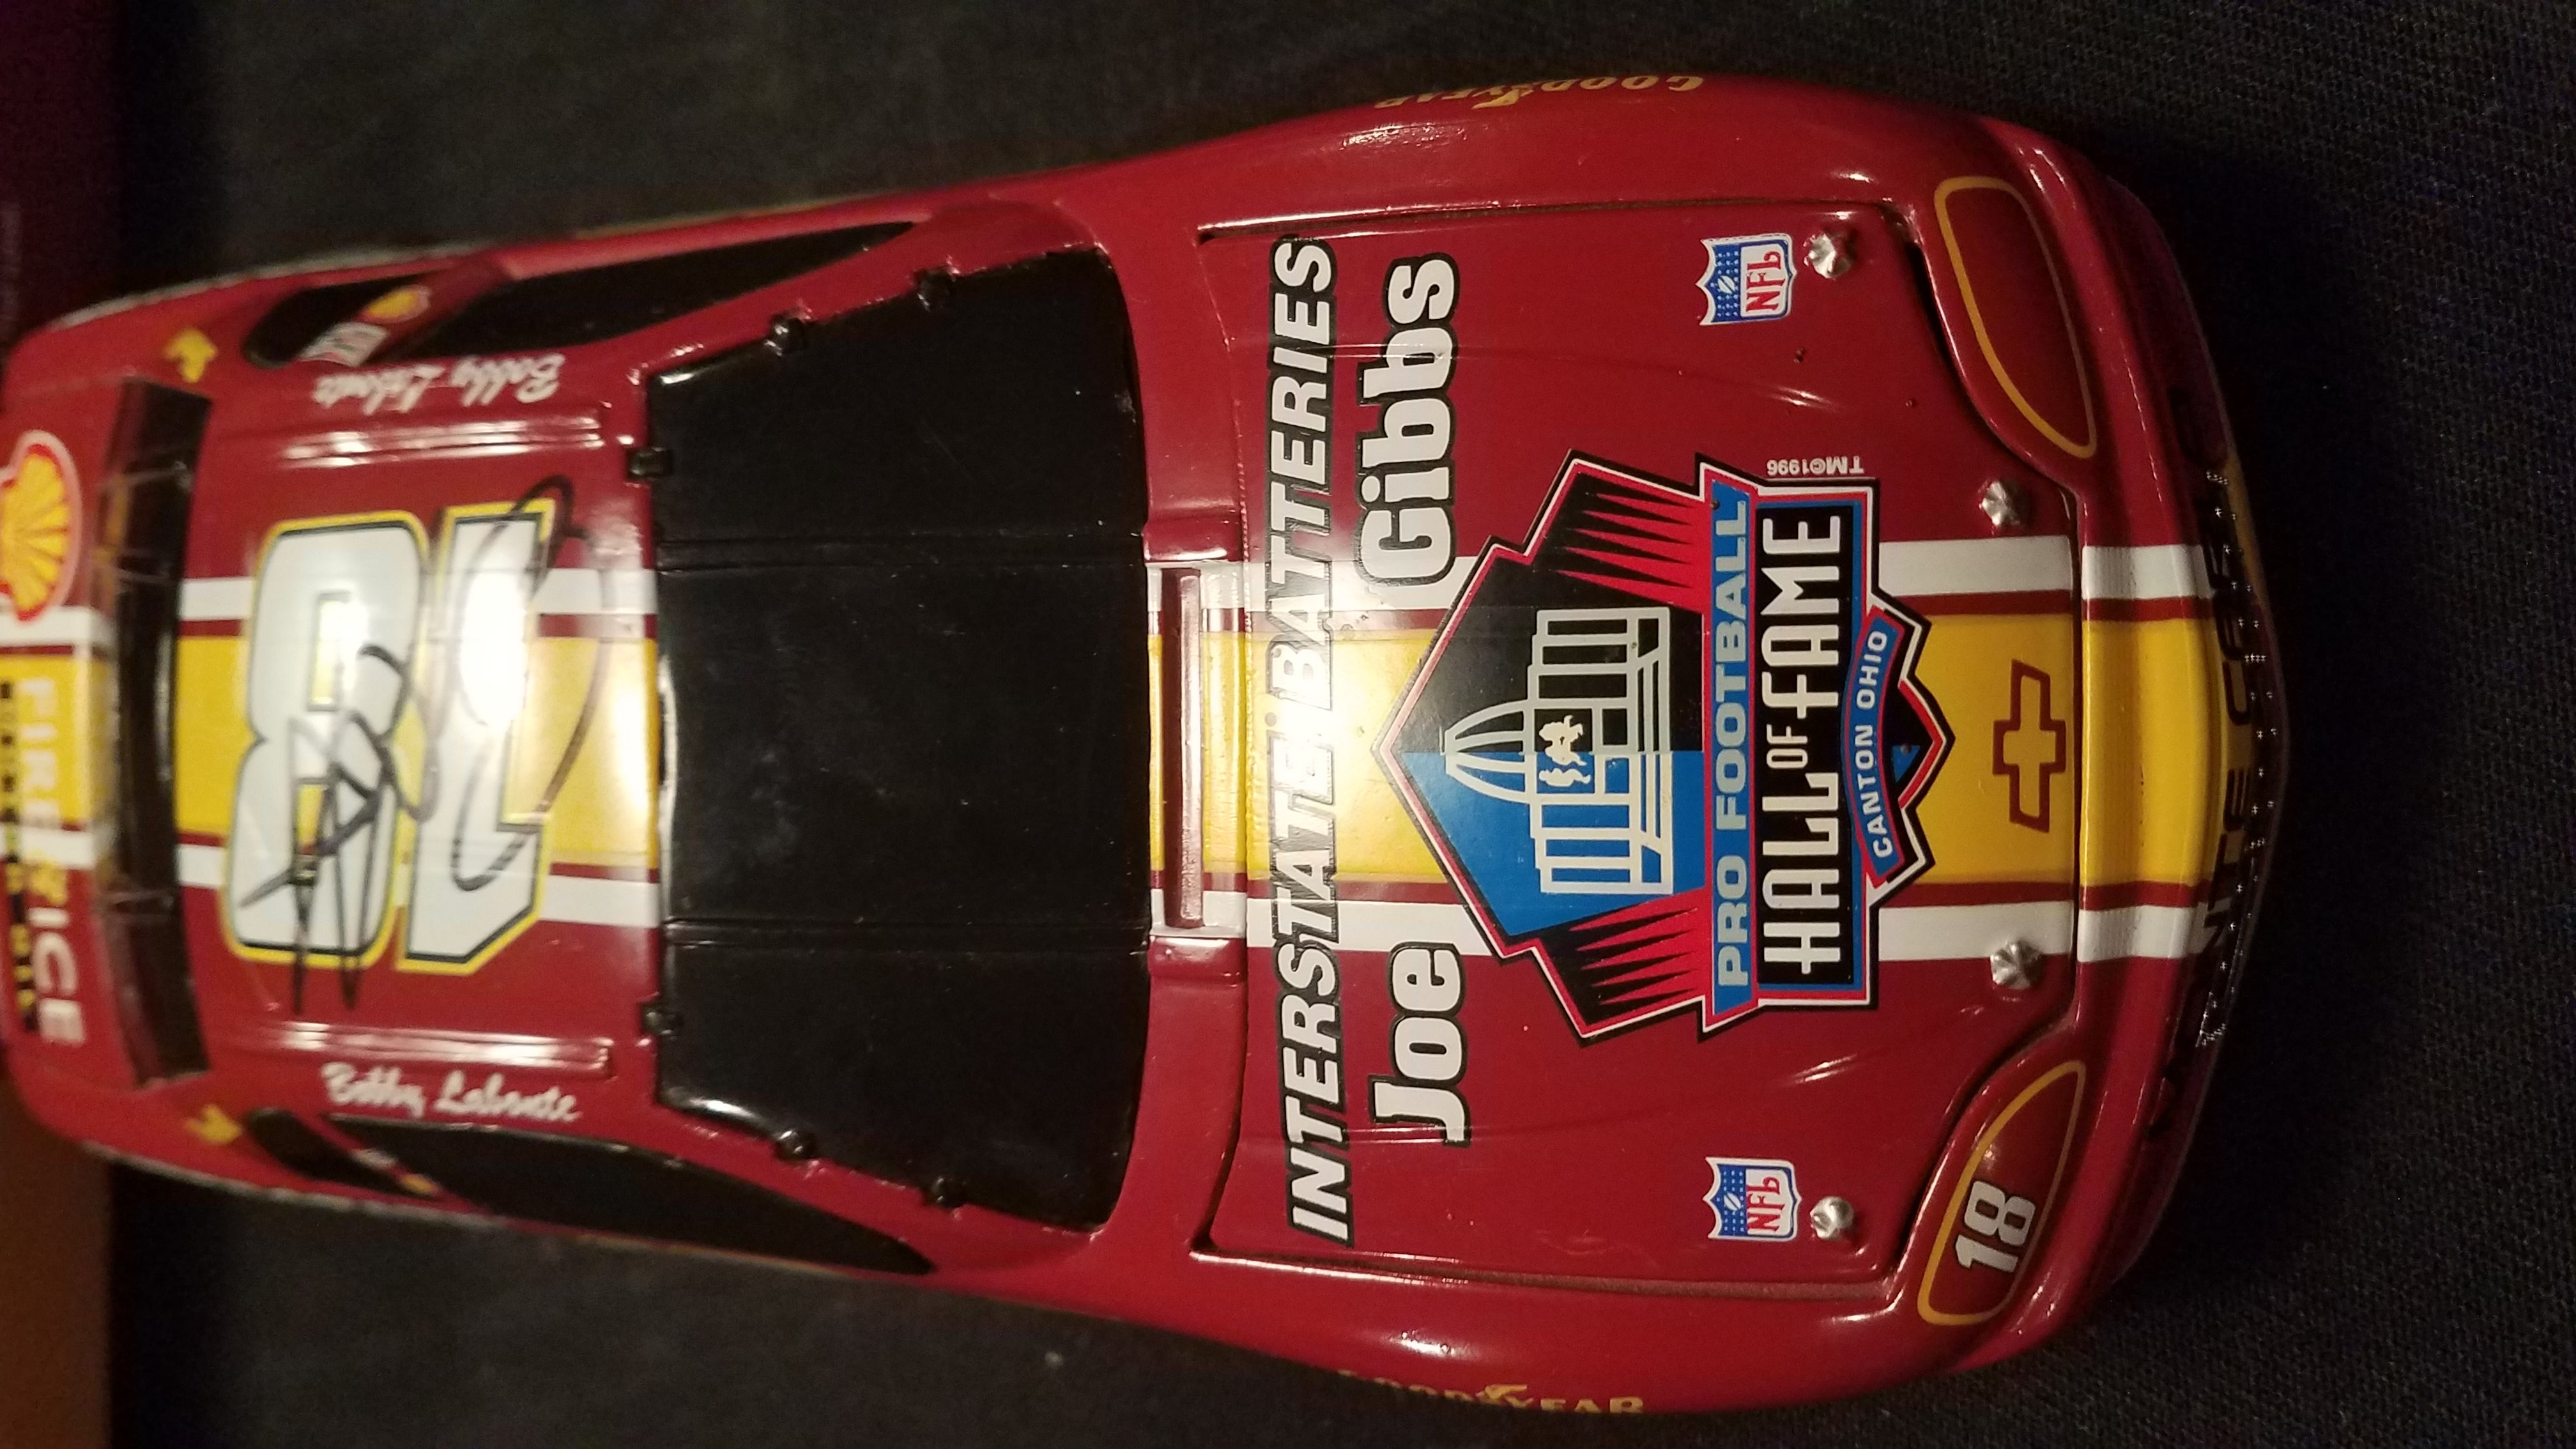 Autographed Bobby Labonte Pro Football Hall of Fame 1996 1:24 Diecast bank in Original Box